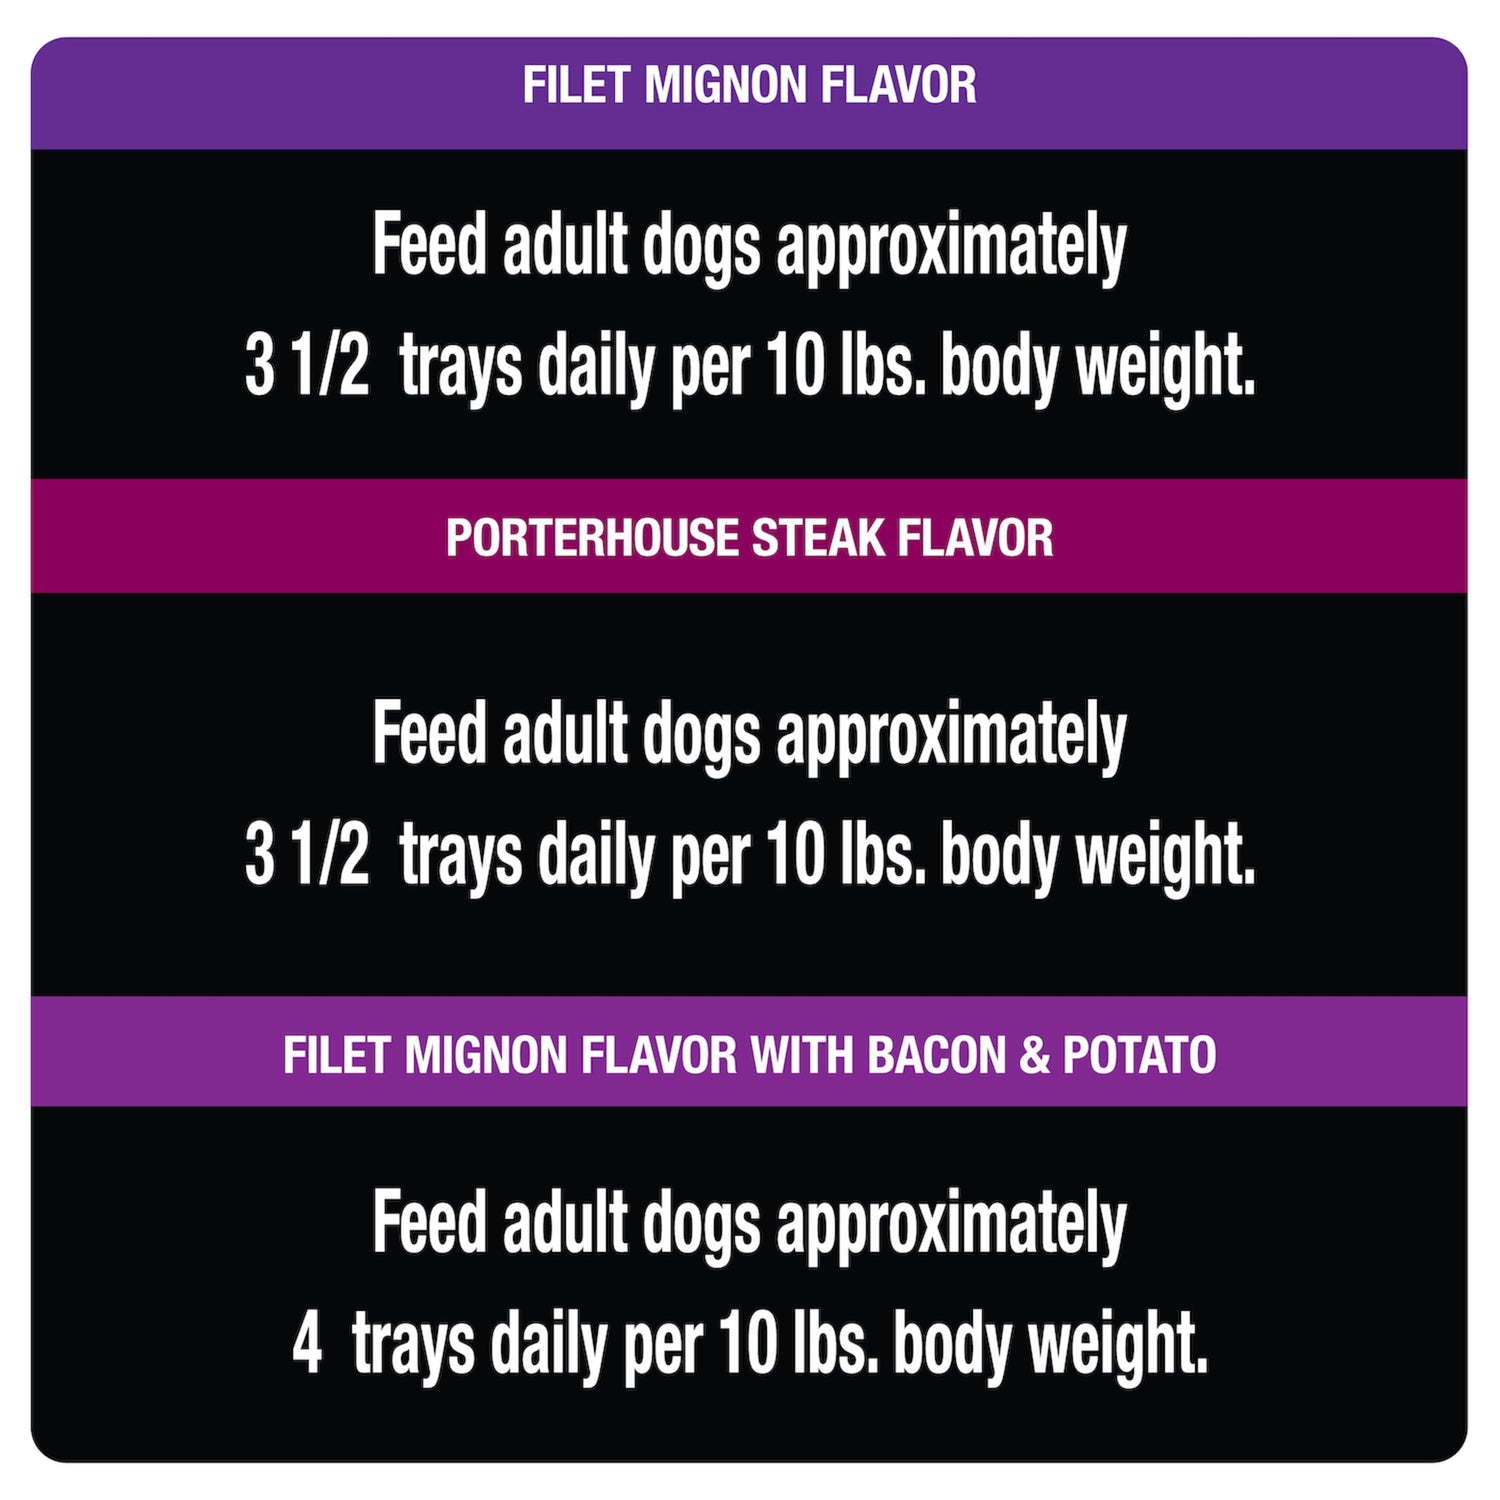 CESAR Steak Lovers Wet Dog Food Toppers Variety Pack, (36 Pack) 3.5 Oz. Trays